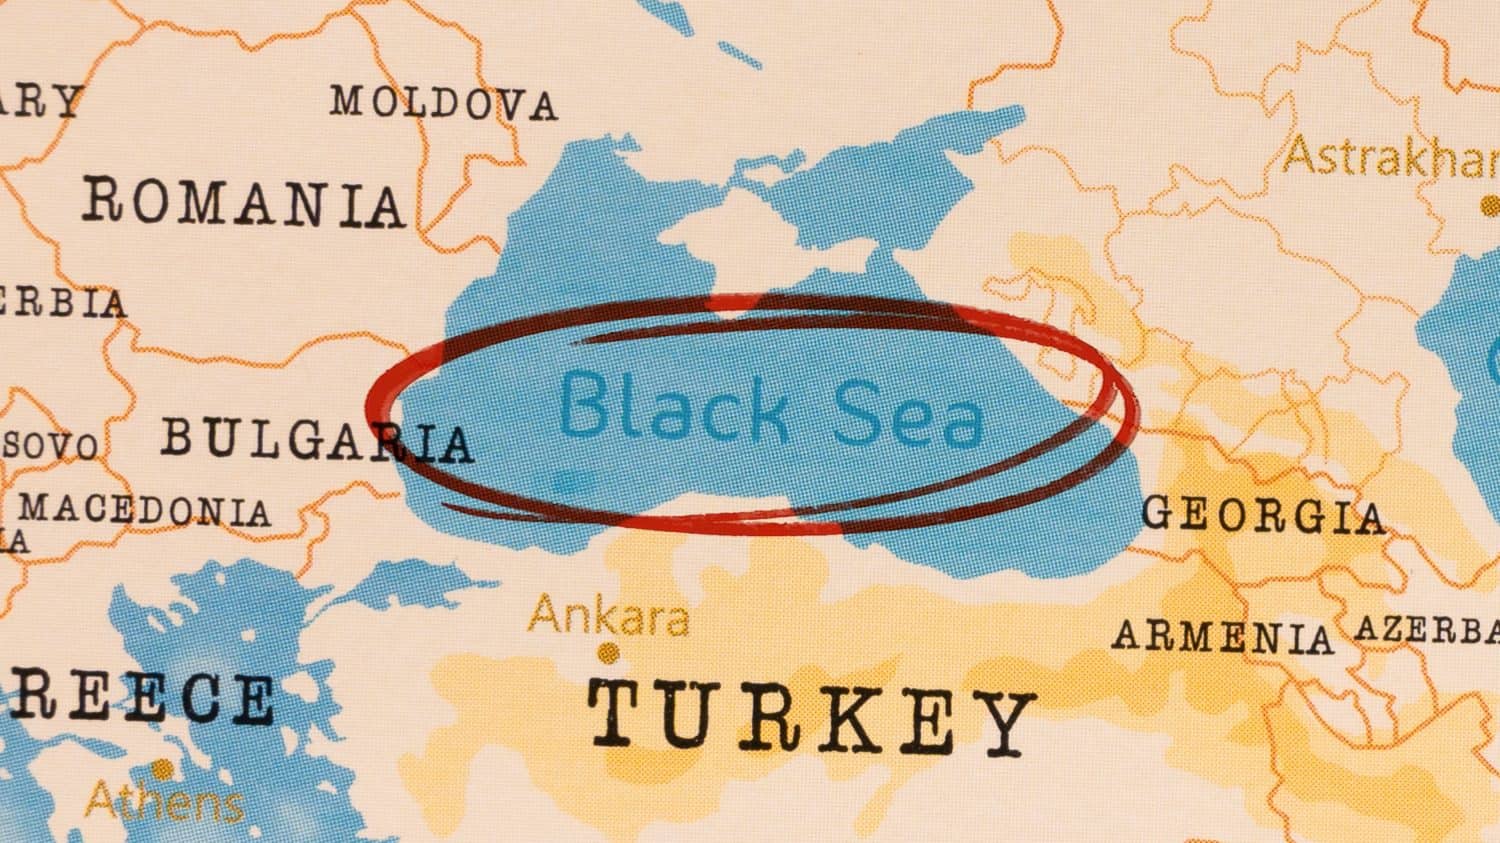 Black Sea marked with Red Circle on Realistic Map.